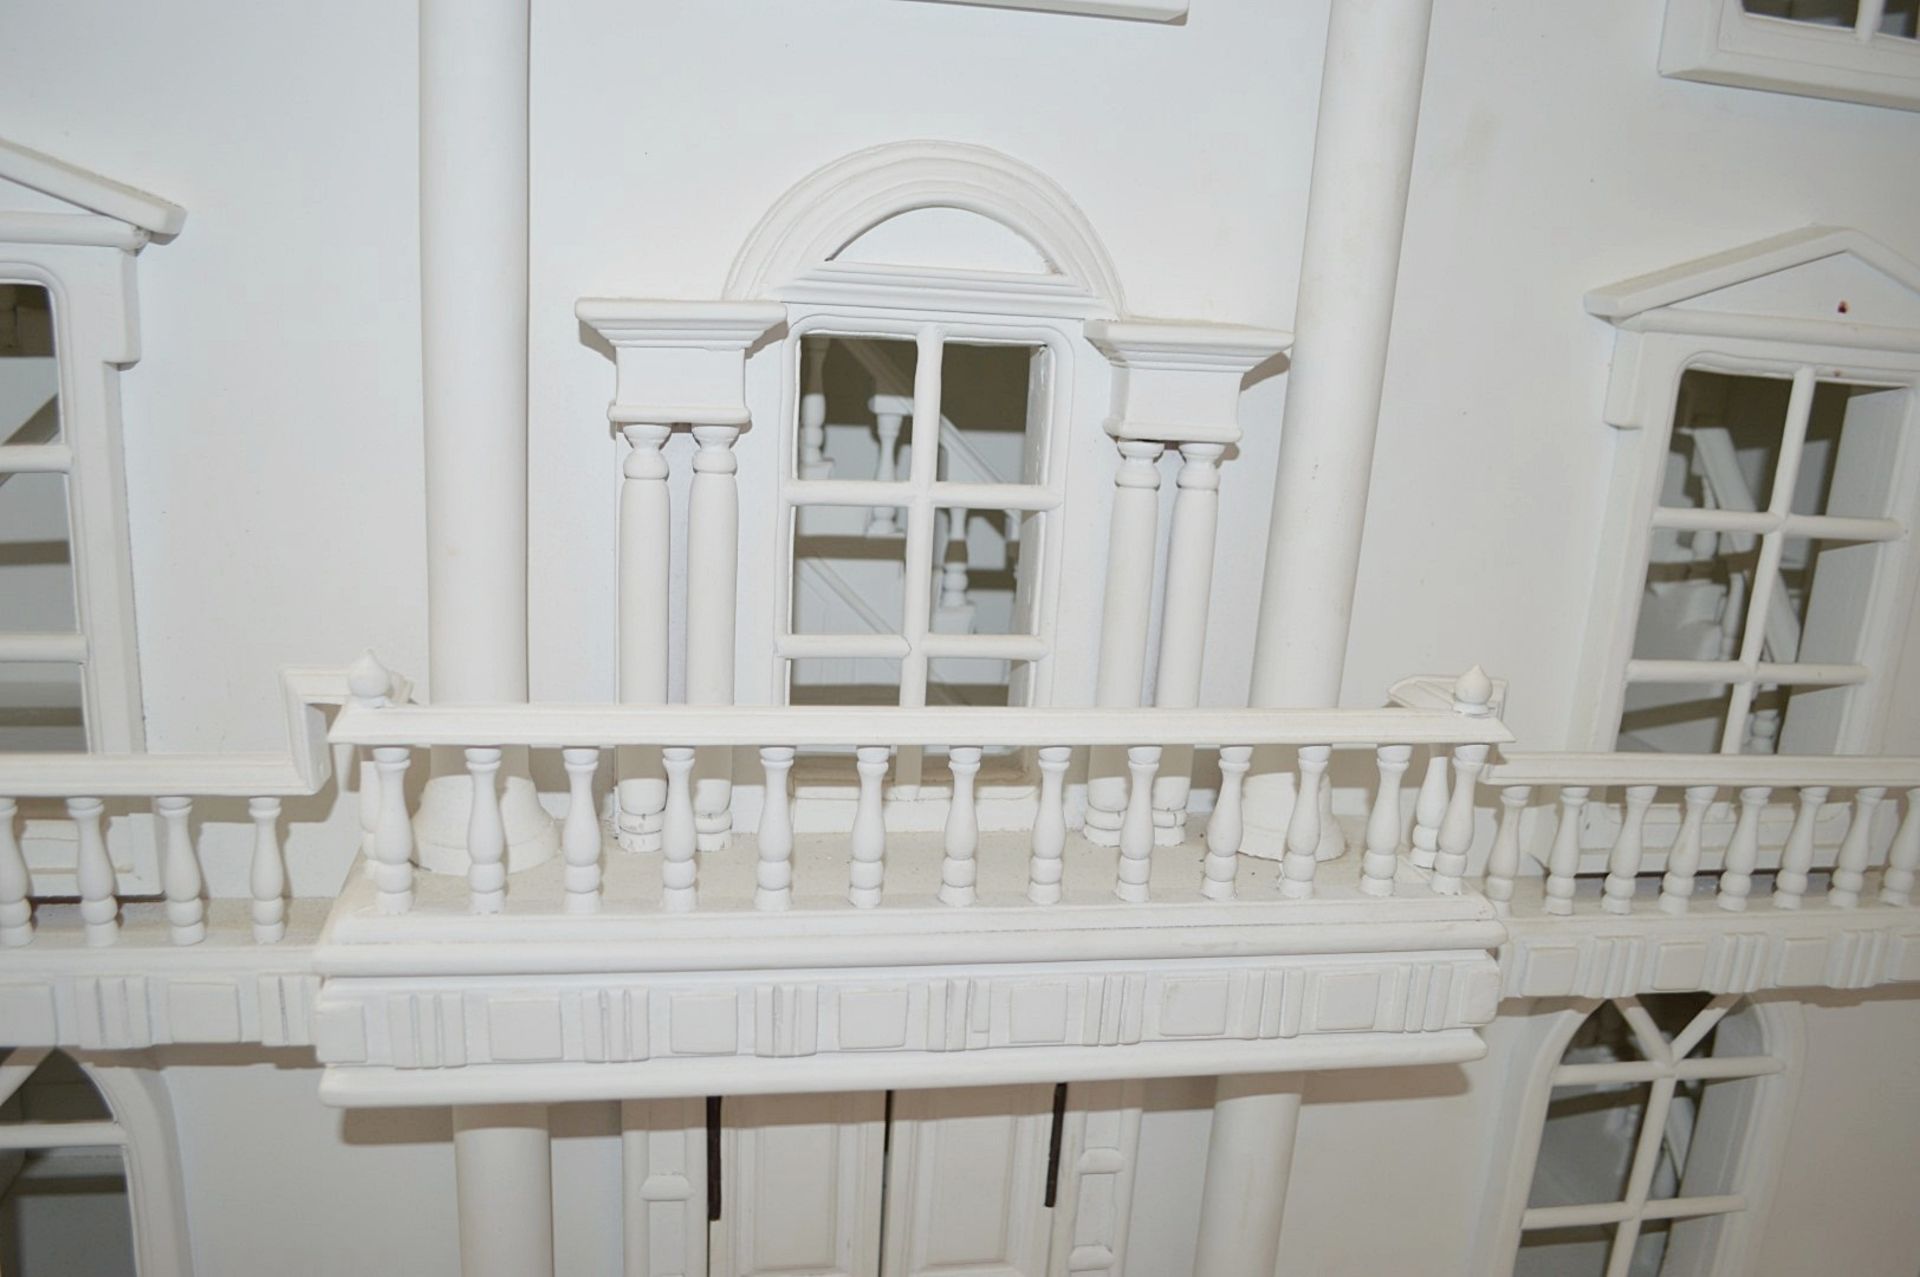 1 x Impressive Bespoke Hand Crafted Wooden Dolls House In White - Image 6 of 19